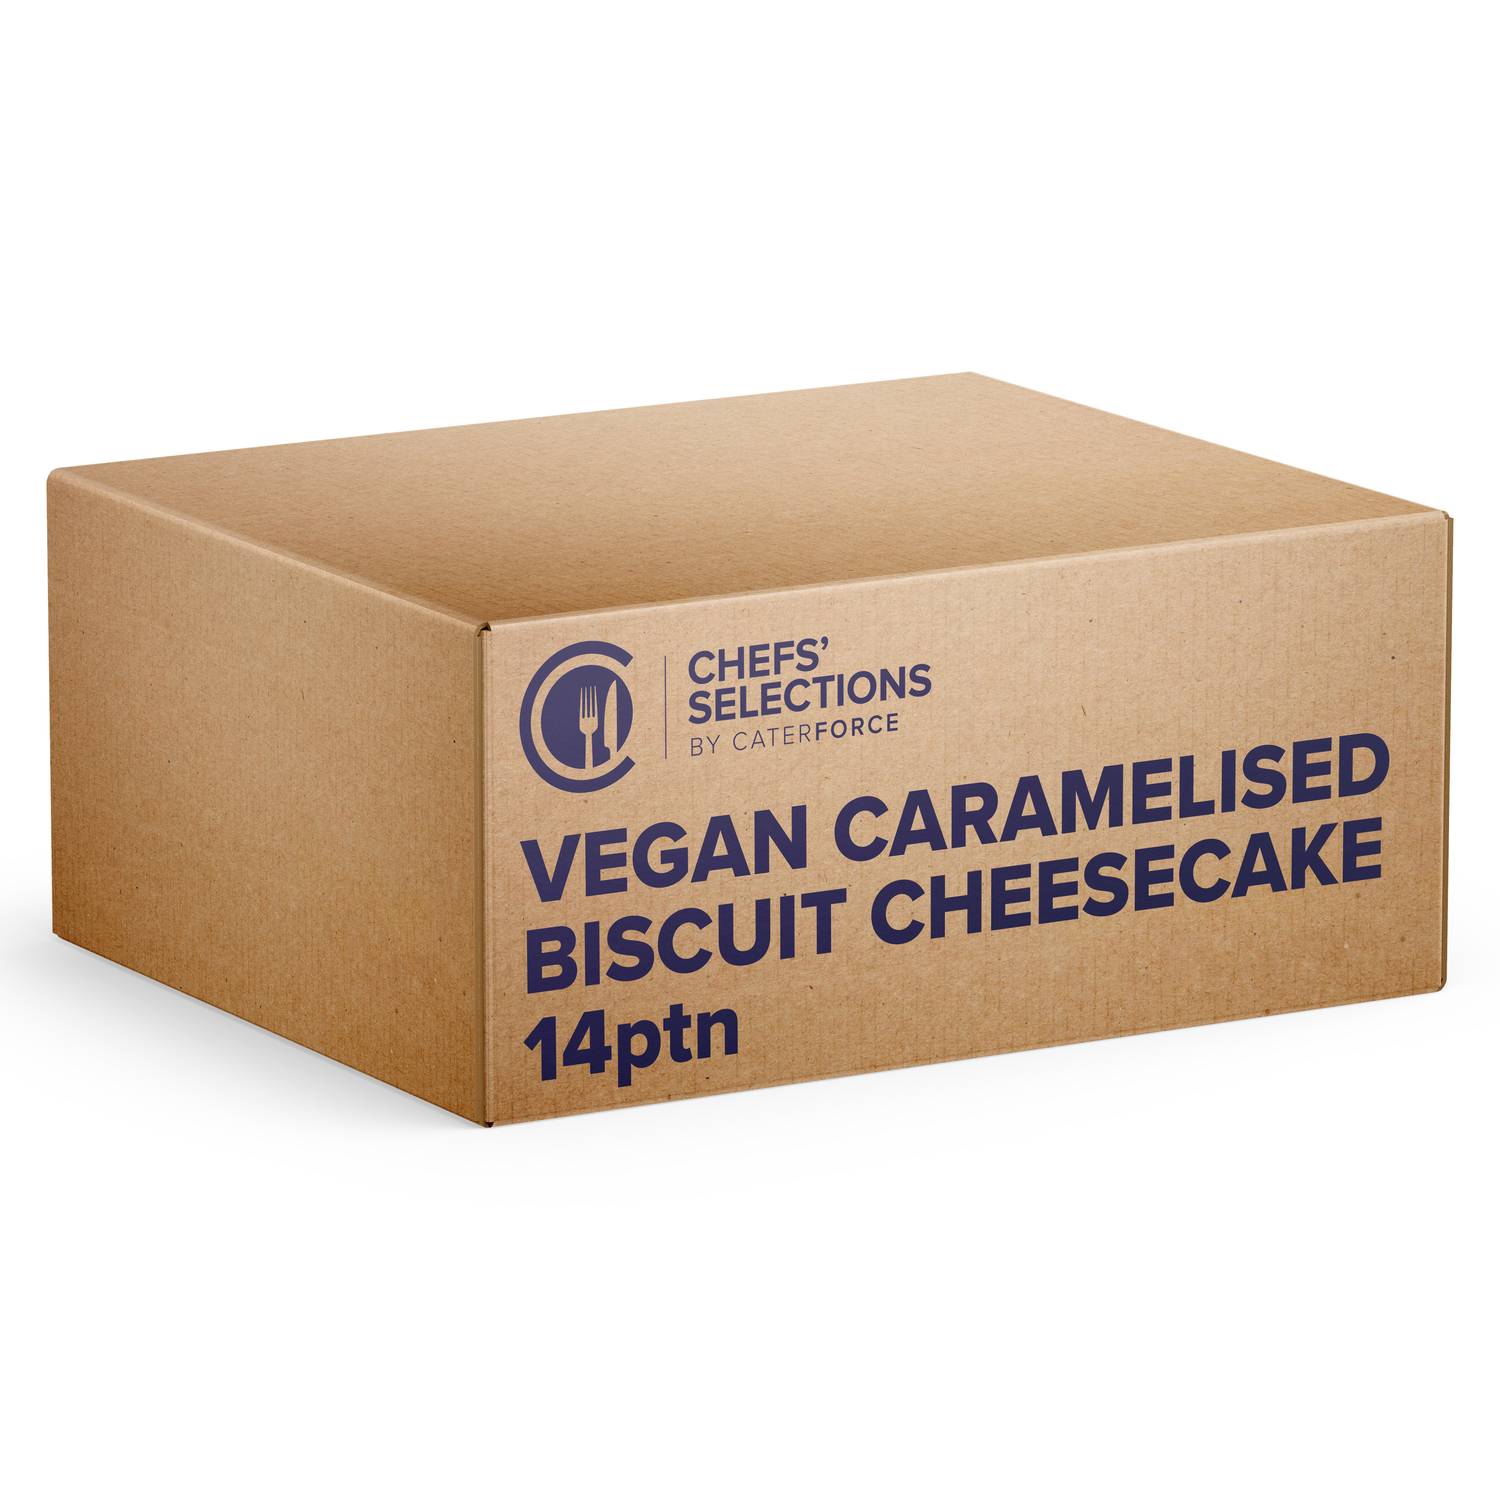 Chefs’ Selections Vegan Caramelised Biscuit Cheesecake (1 x 14p/ptn)